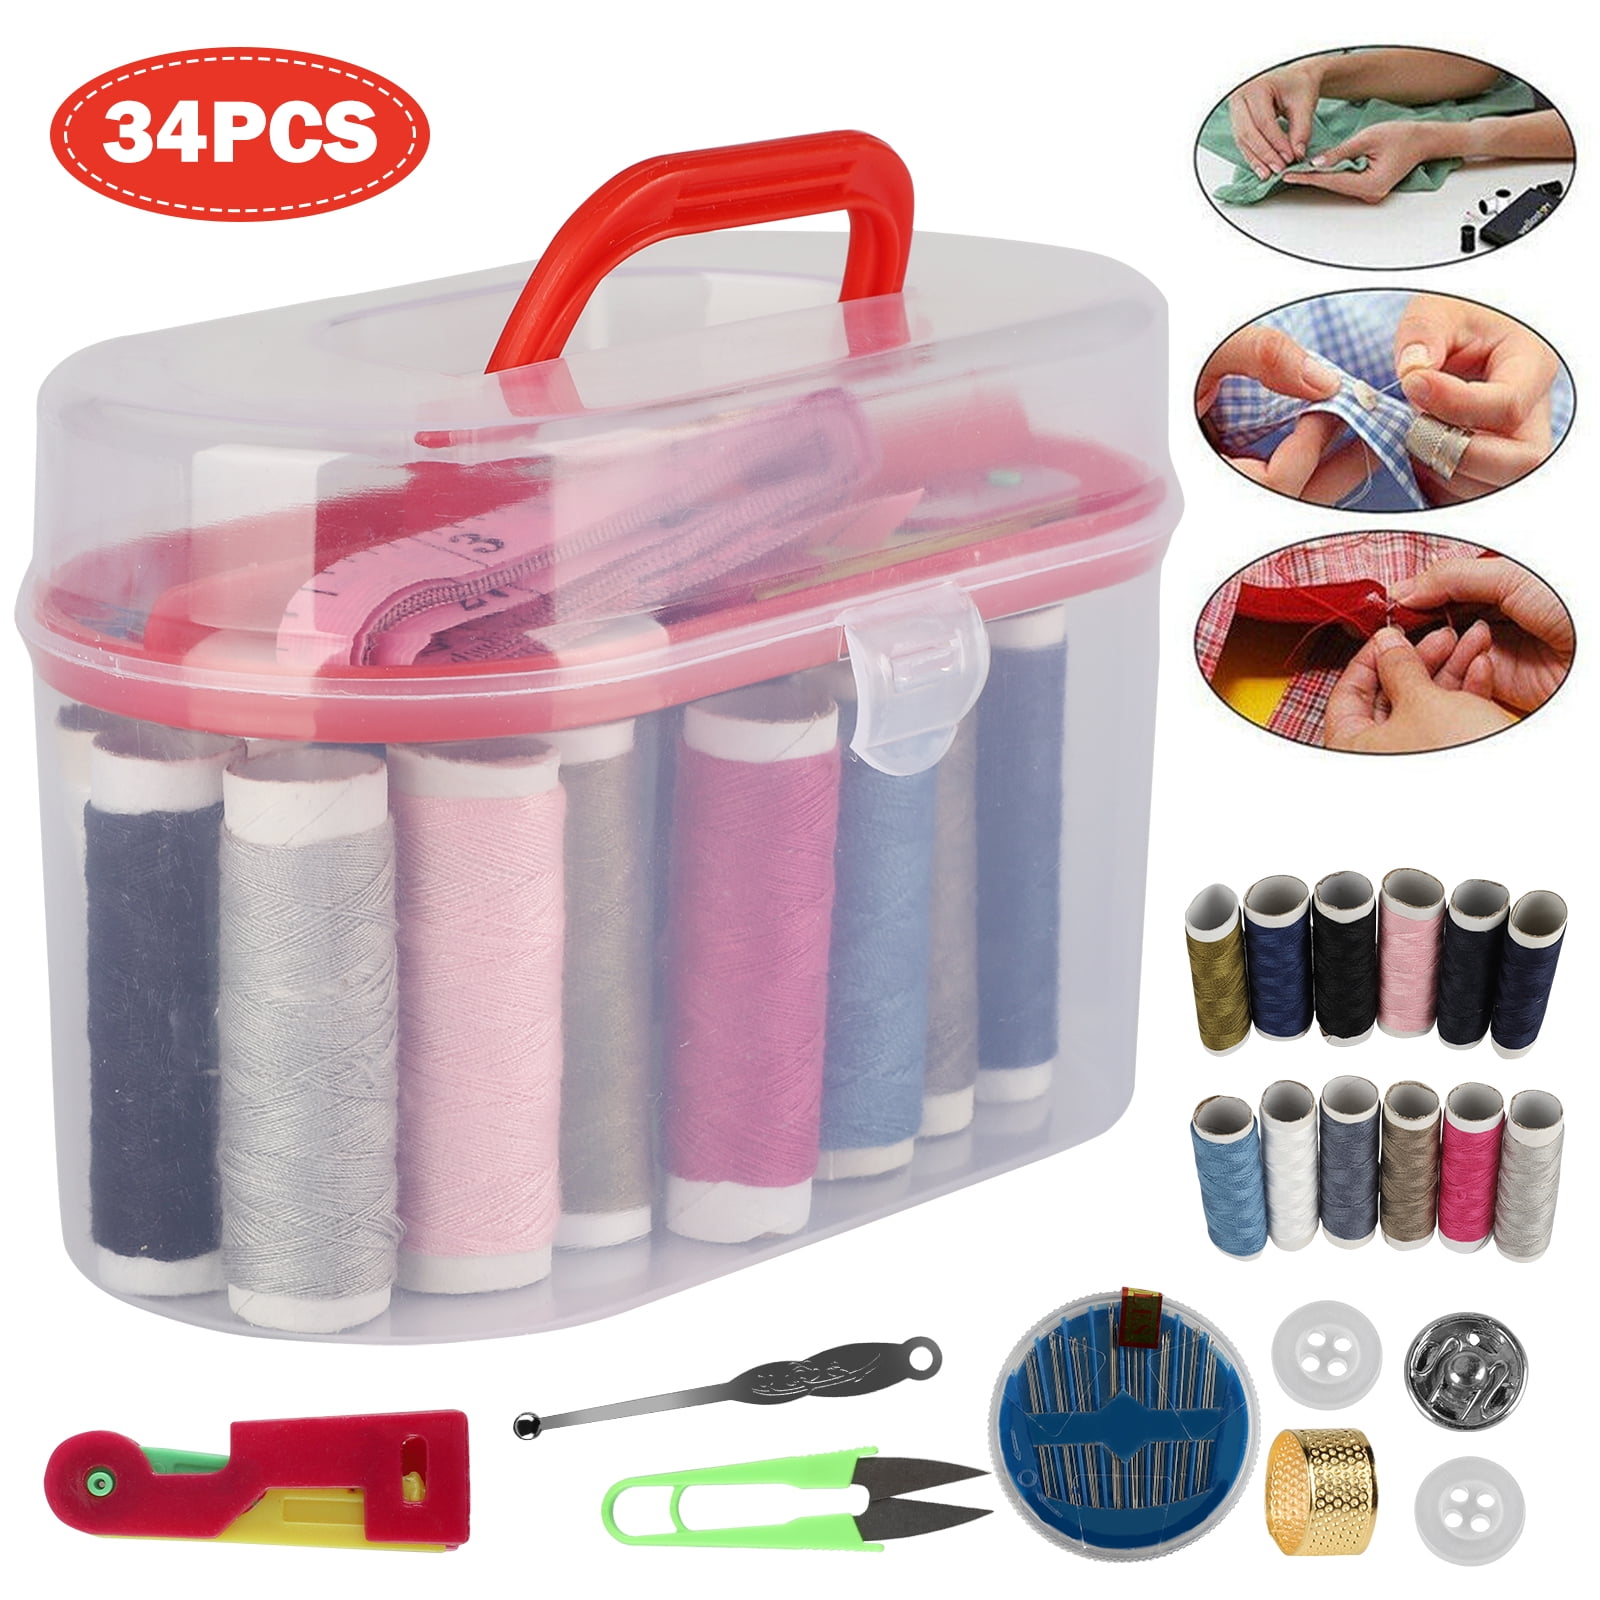 Sewing Set,24 Color Sewing Thread Thimble Threader Needle Plate Sewing  Supplies Kit with Panda Pattern Bamboo Box - Beginner Small Sewing Kit